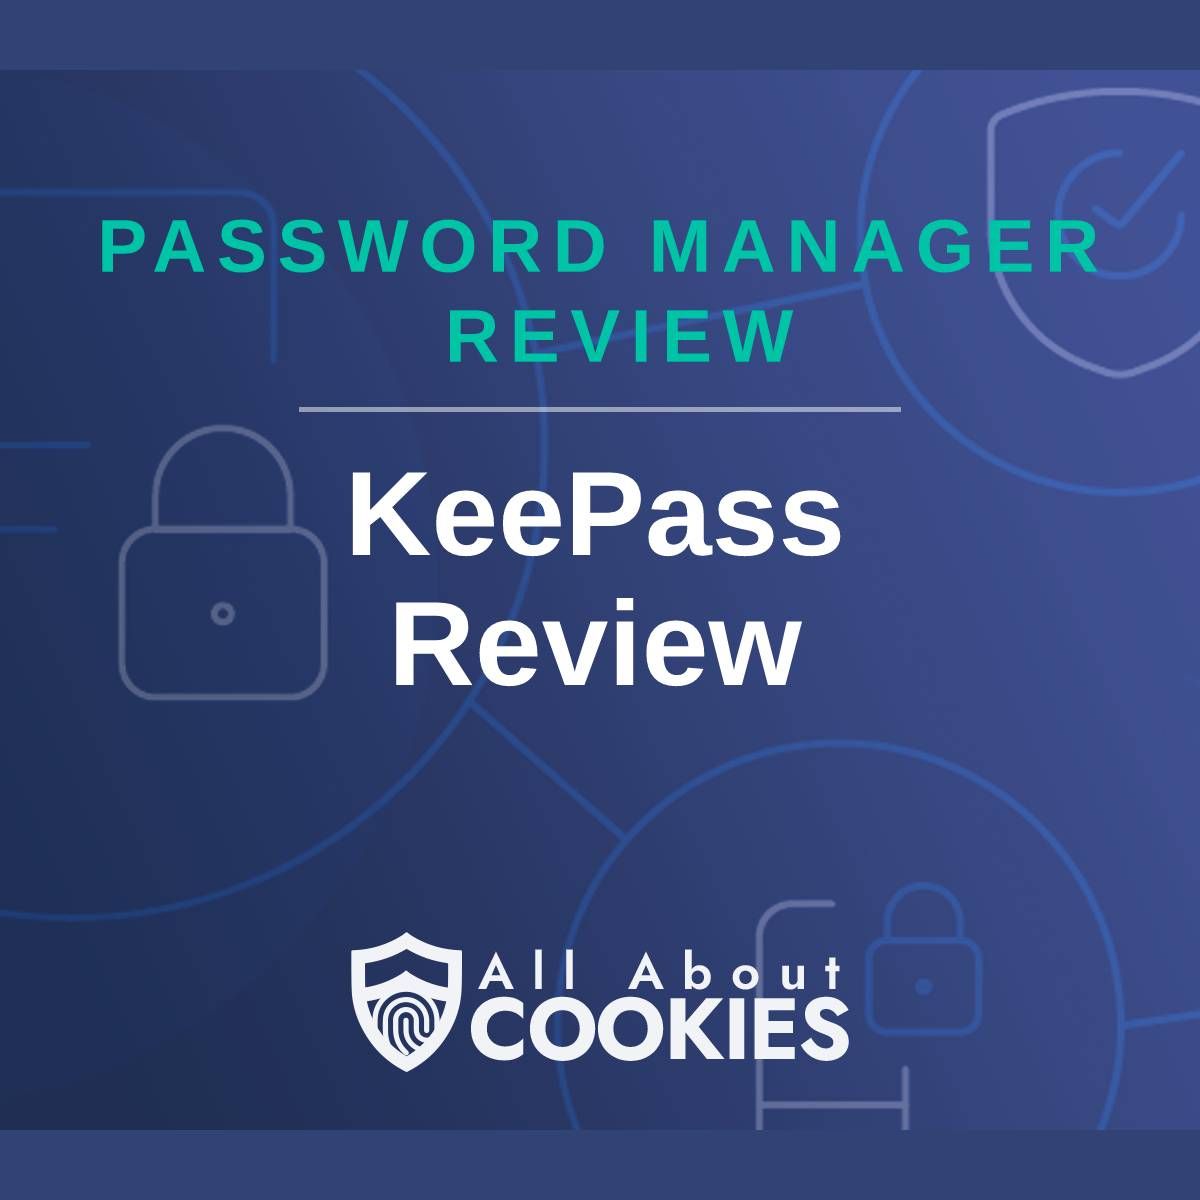 A blue background with images of locks and shields with the text &quot;Password Manager Review KeePass Review&quot; and the All About Cookies logo. 